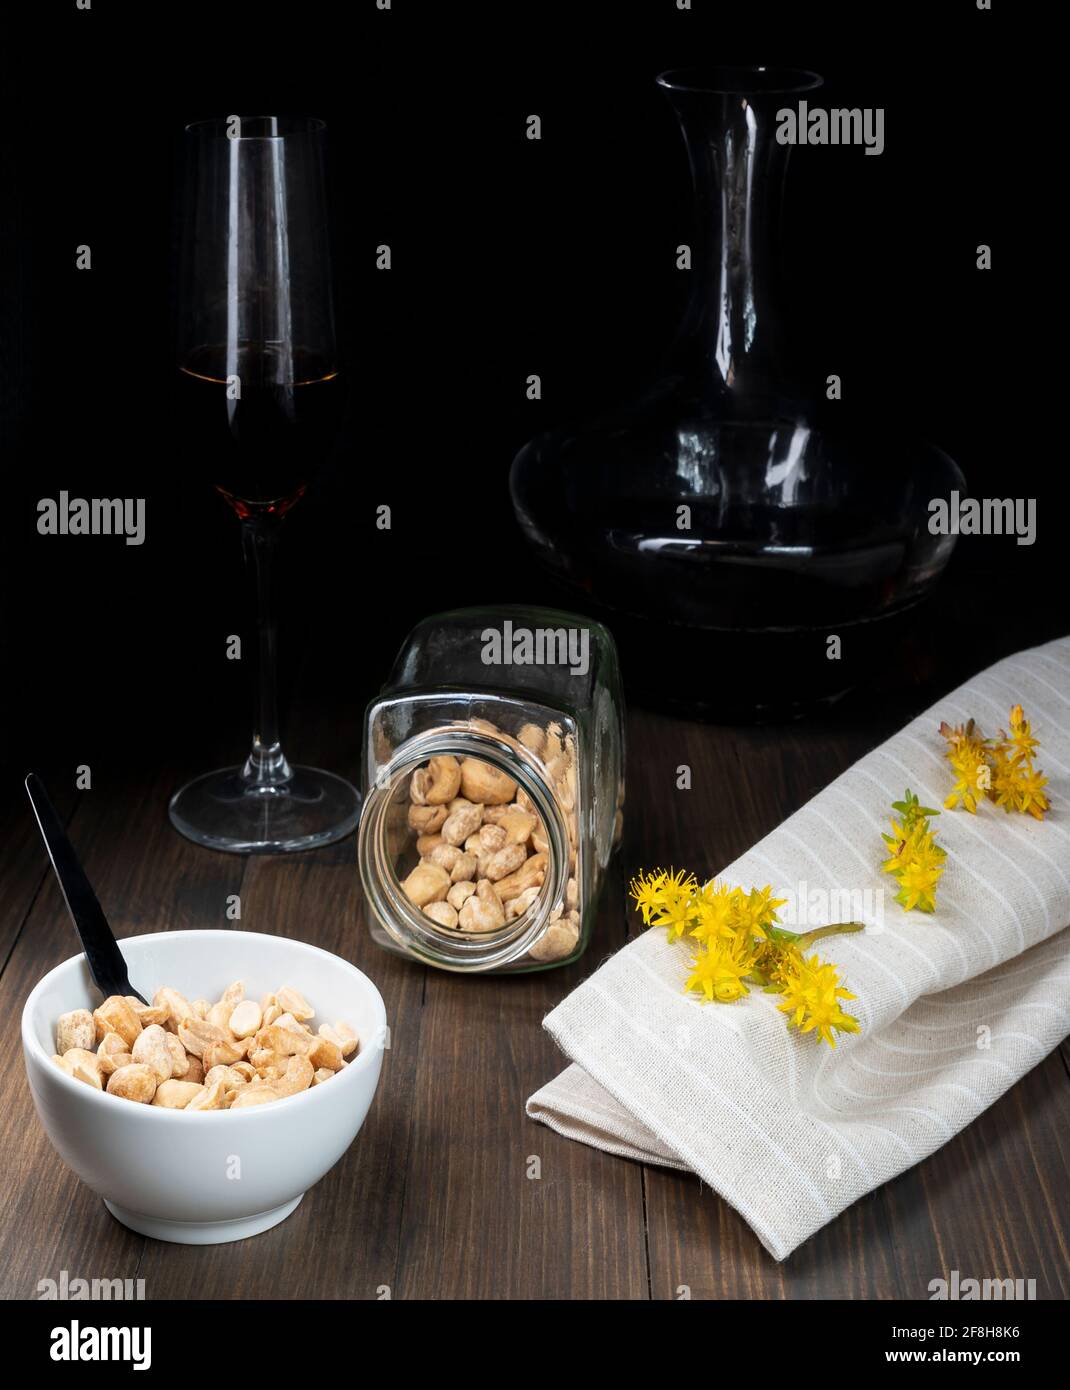 A white bowl containing peanuts and other dried fruit near glass containers with black wine and yellow flowers of sedum palmeri Stock Photo